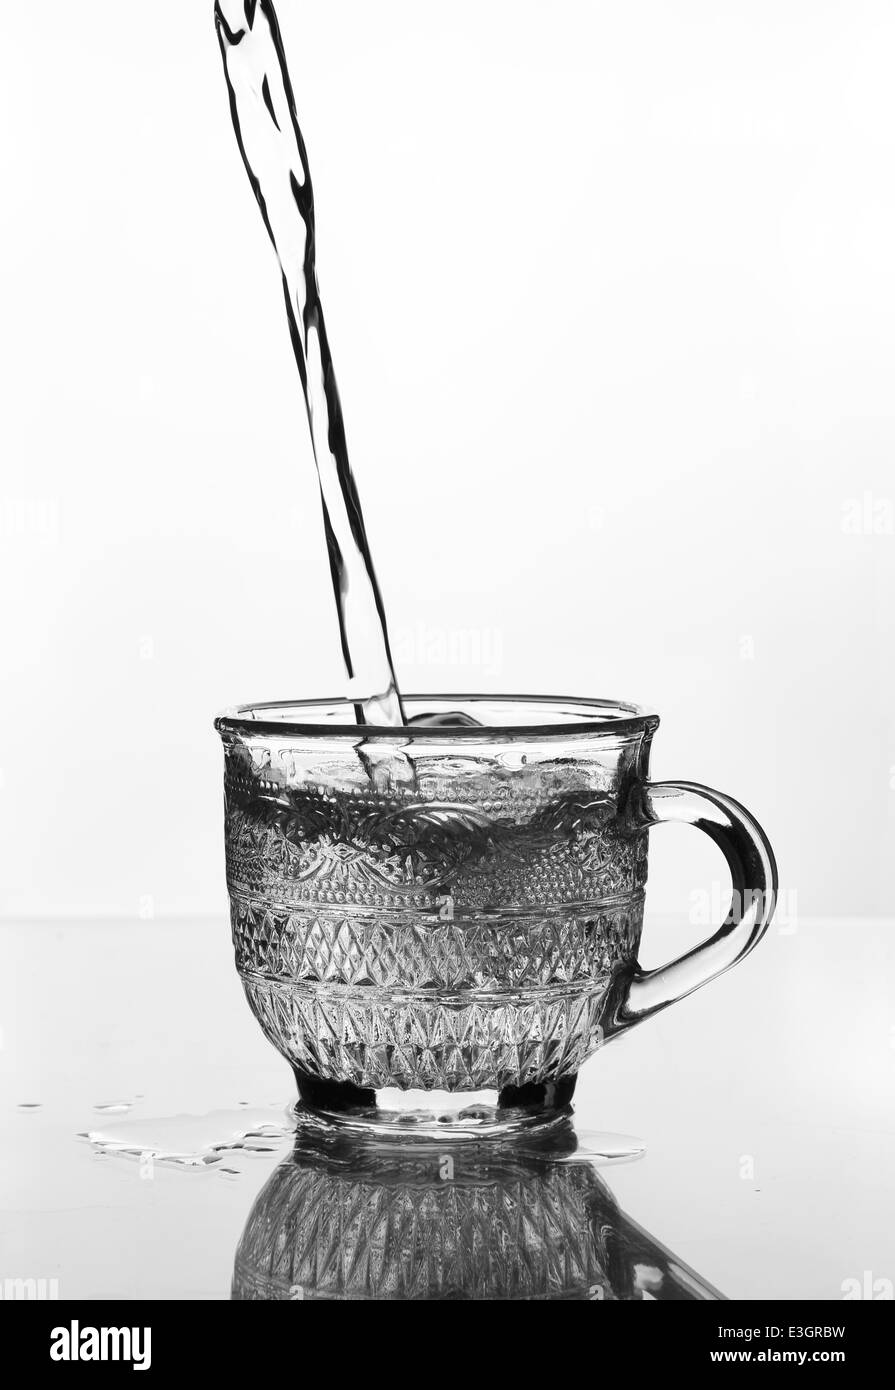 The process of brewing tea, pouring hot water from the kettle into the Cup,  steam coming out of the mug, water droplets on the glass, black background  Stock Photo